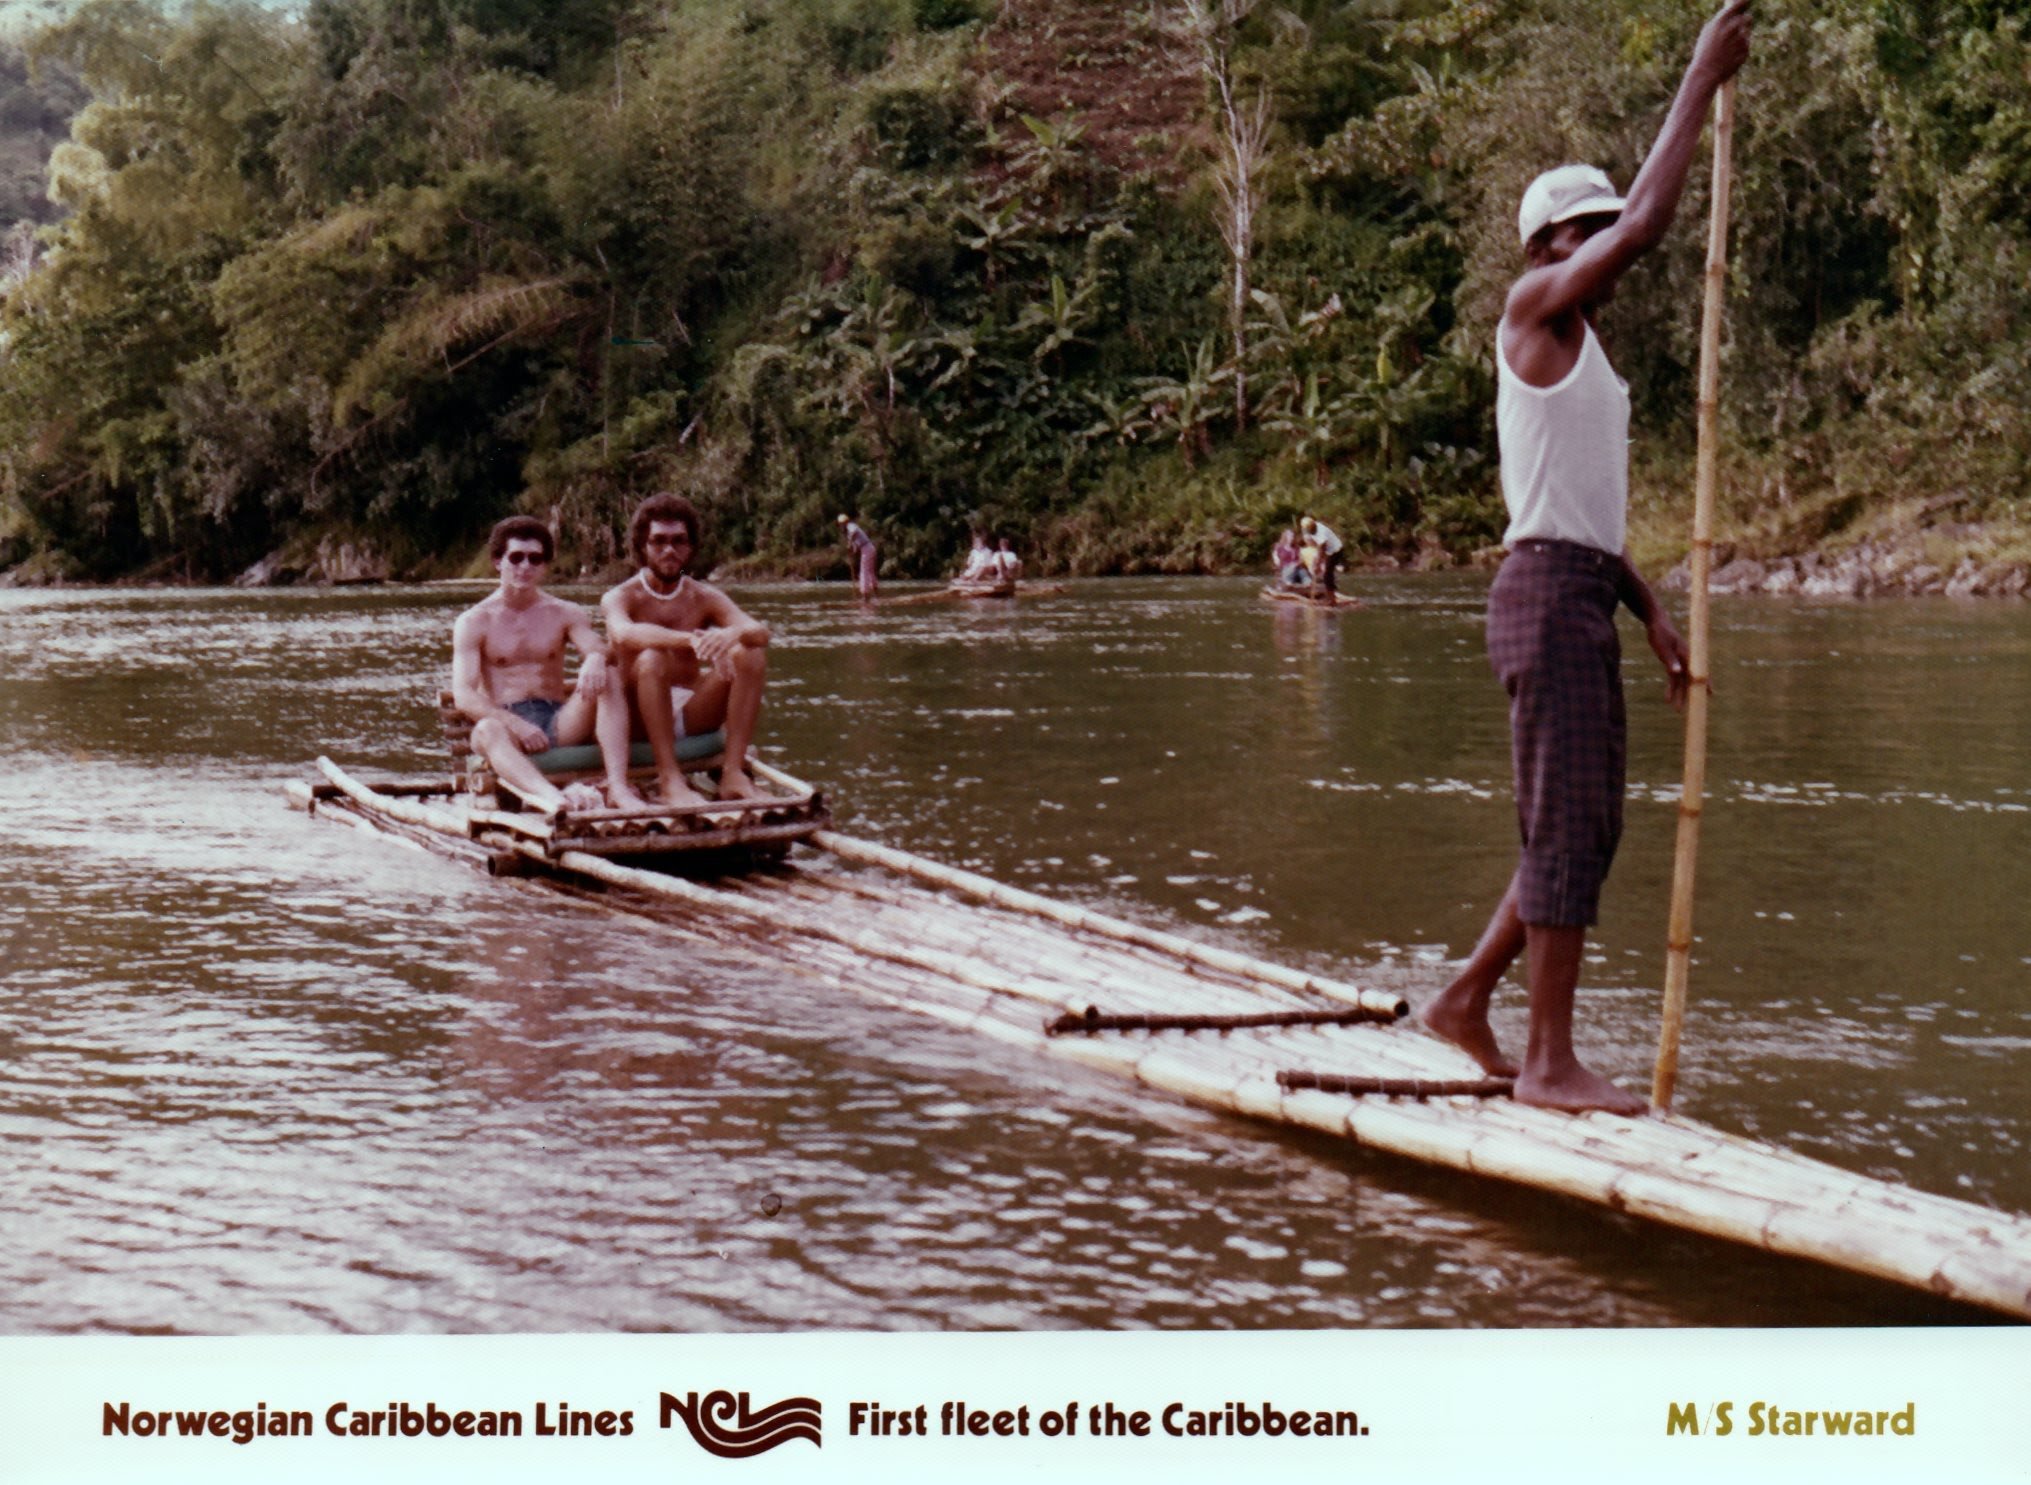 Billy's Father and his Friend on a Bamboo Raft int he mid-1970s